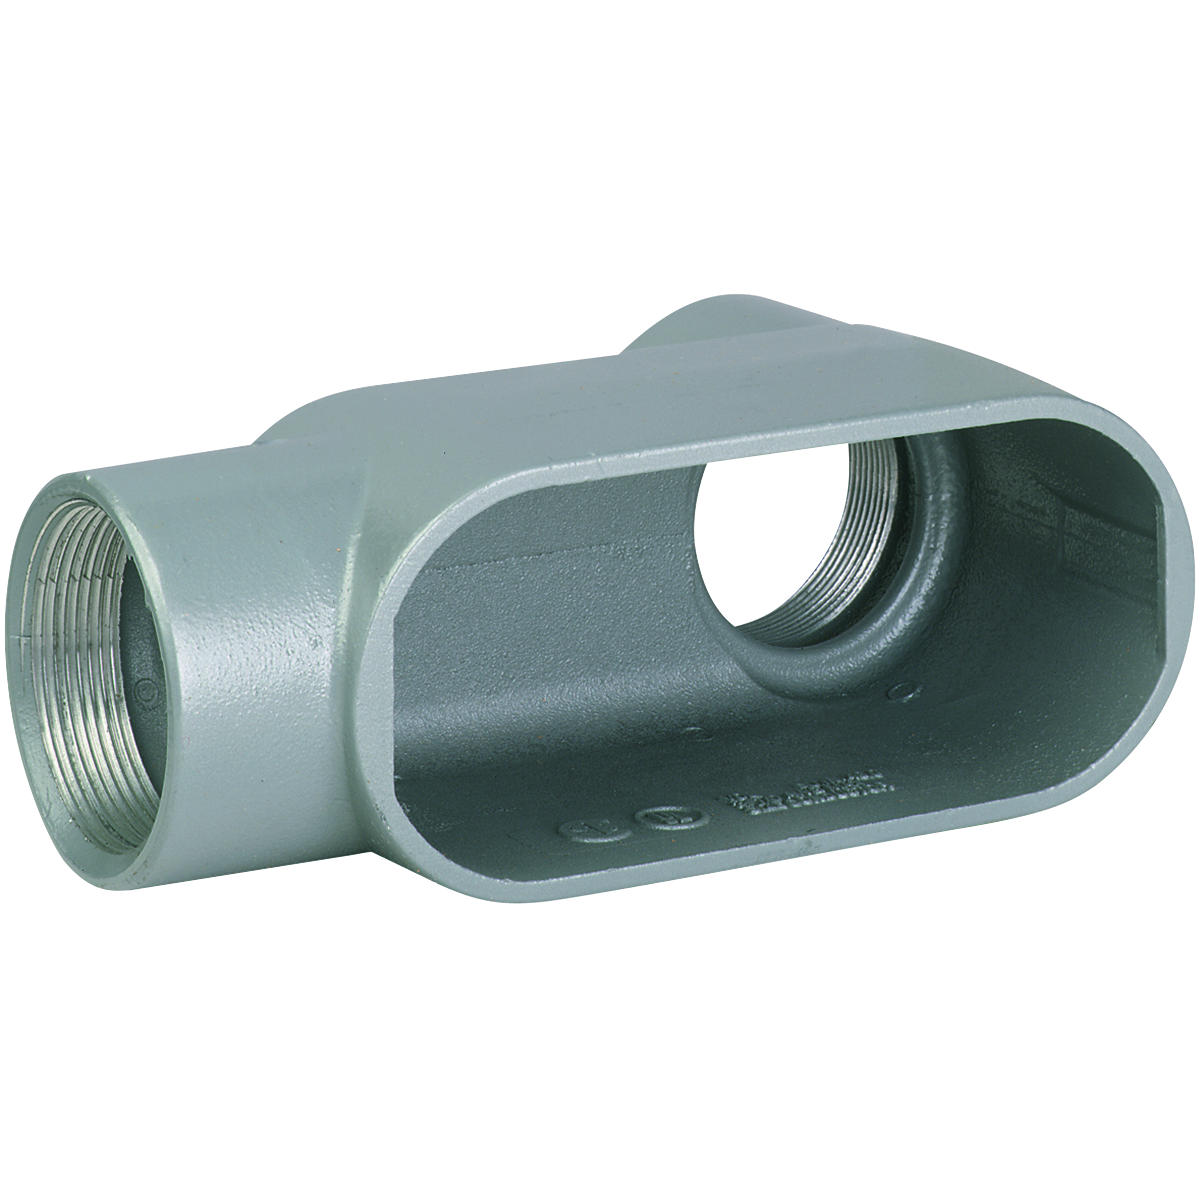 DURALOY 7 SERIES - IRON CONDUIT BODY - LB TYPE - HUB SIZE 3-1/2 INCH -VOLUME 238.0 CUBIC INCHES